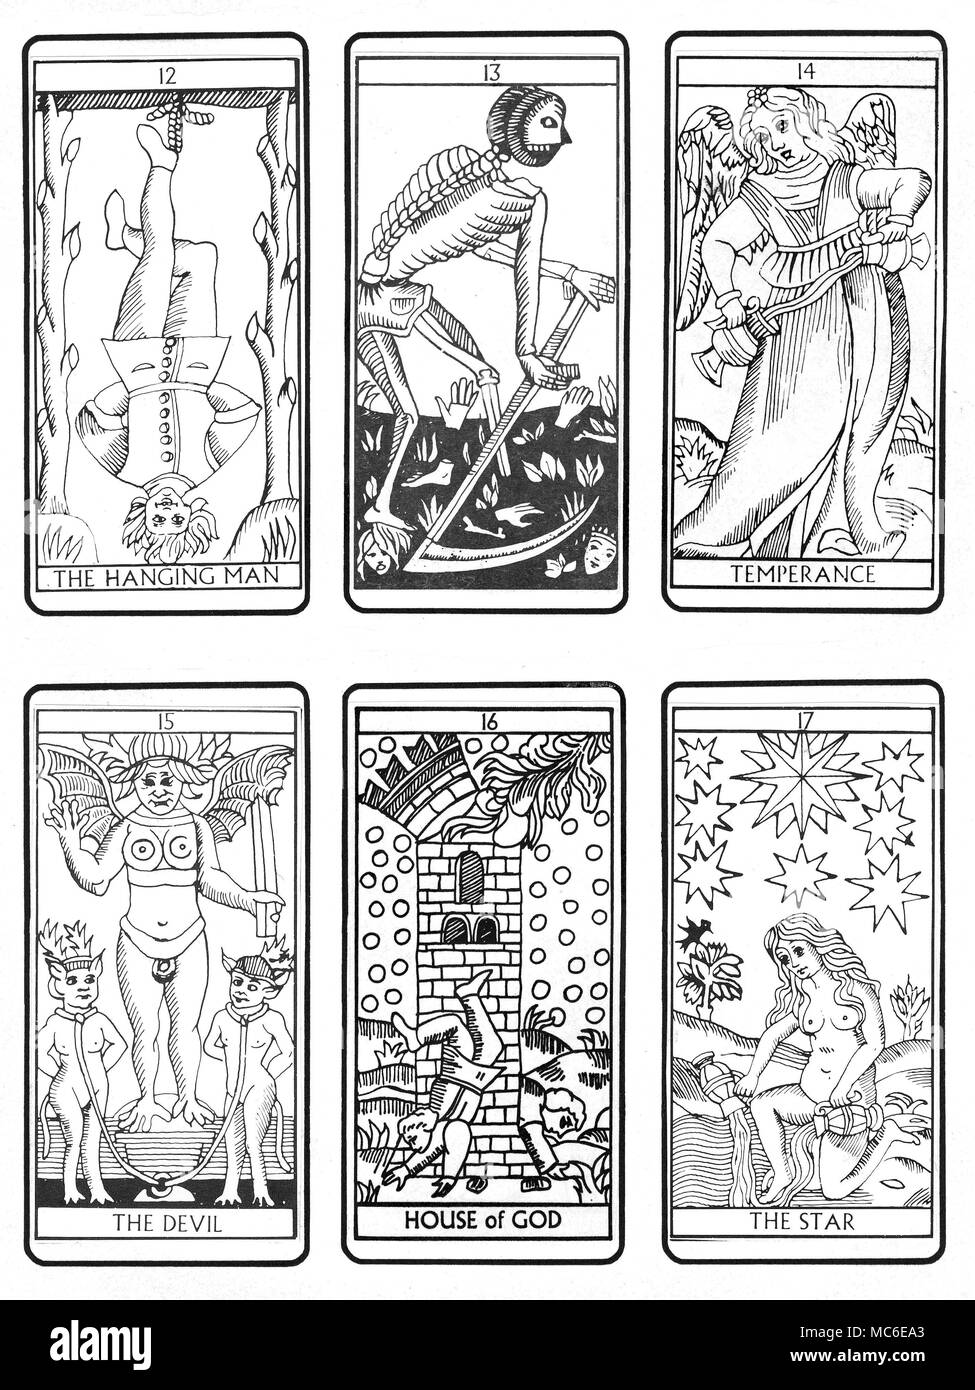 TAROT CARDS - MARSEILLES DECK The third six of the sequence of 22 Tarot cards (according to the traditional Marseilles design), from the twelfth card (The Hanging Man), through the Death Card, Temperance, The Devil, The House of God and The Star. The remaining sequences are available, in batches of 6. Stock Photo